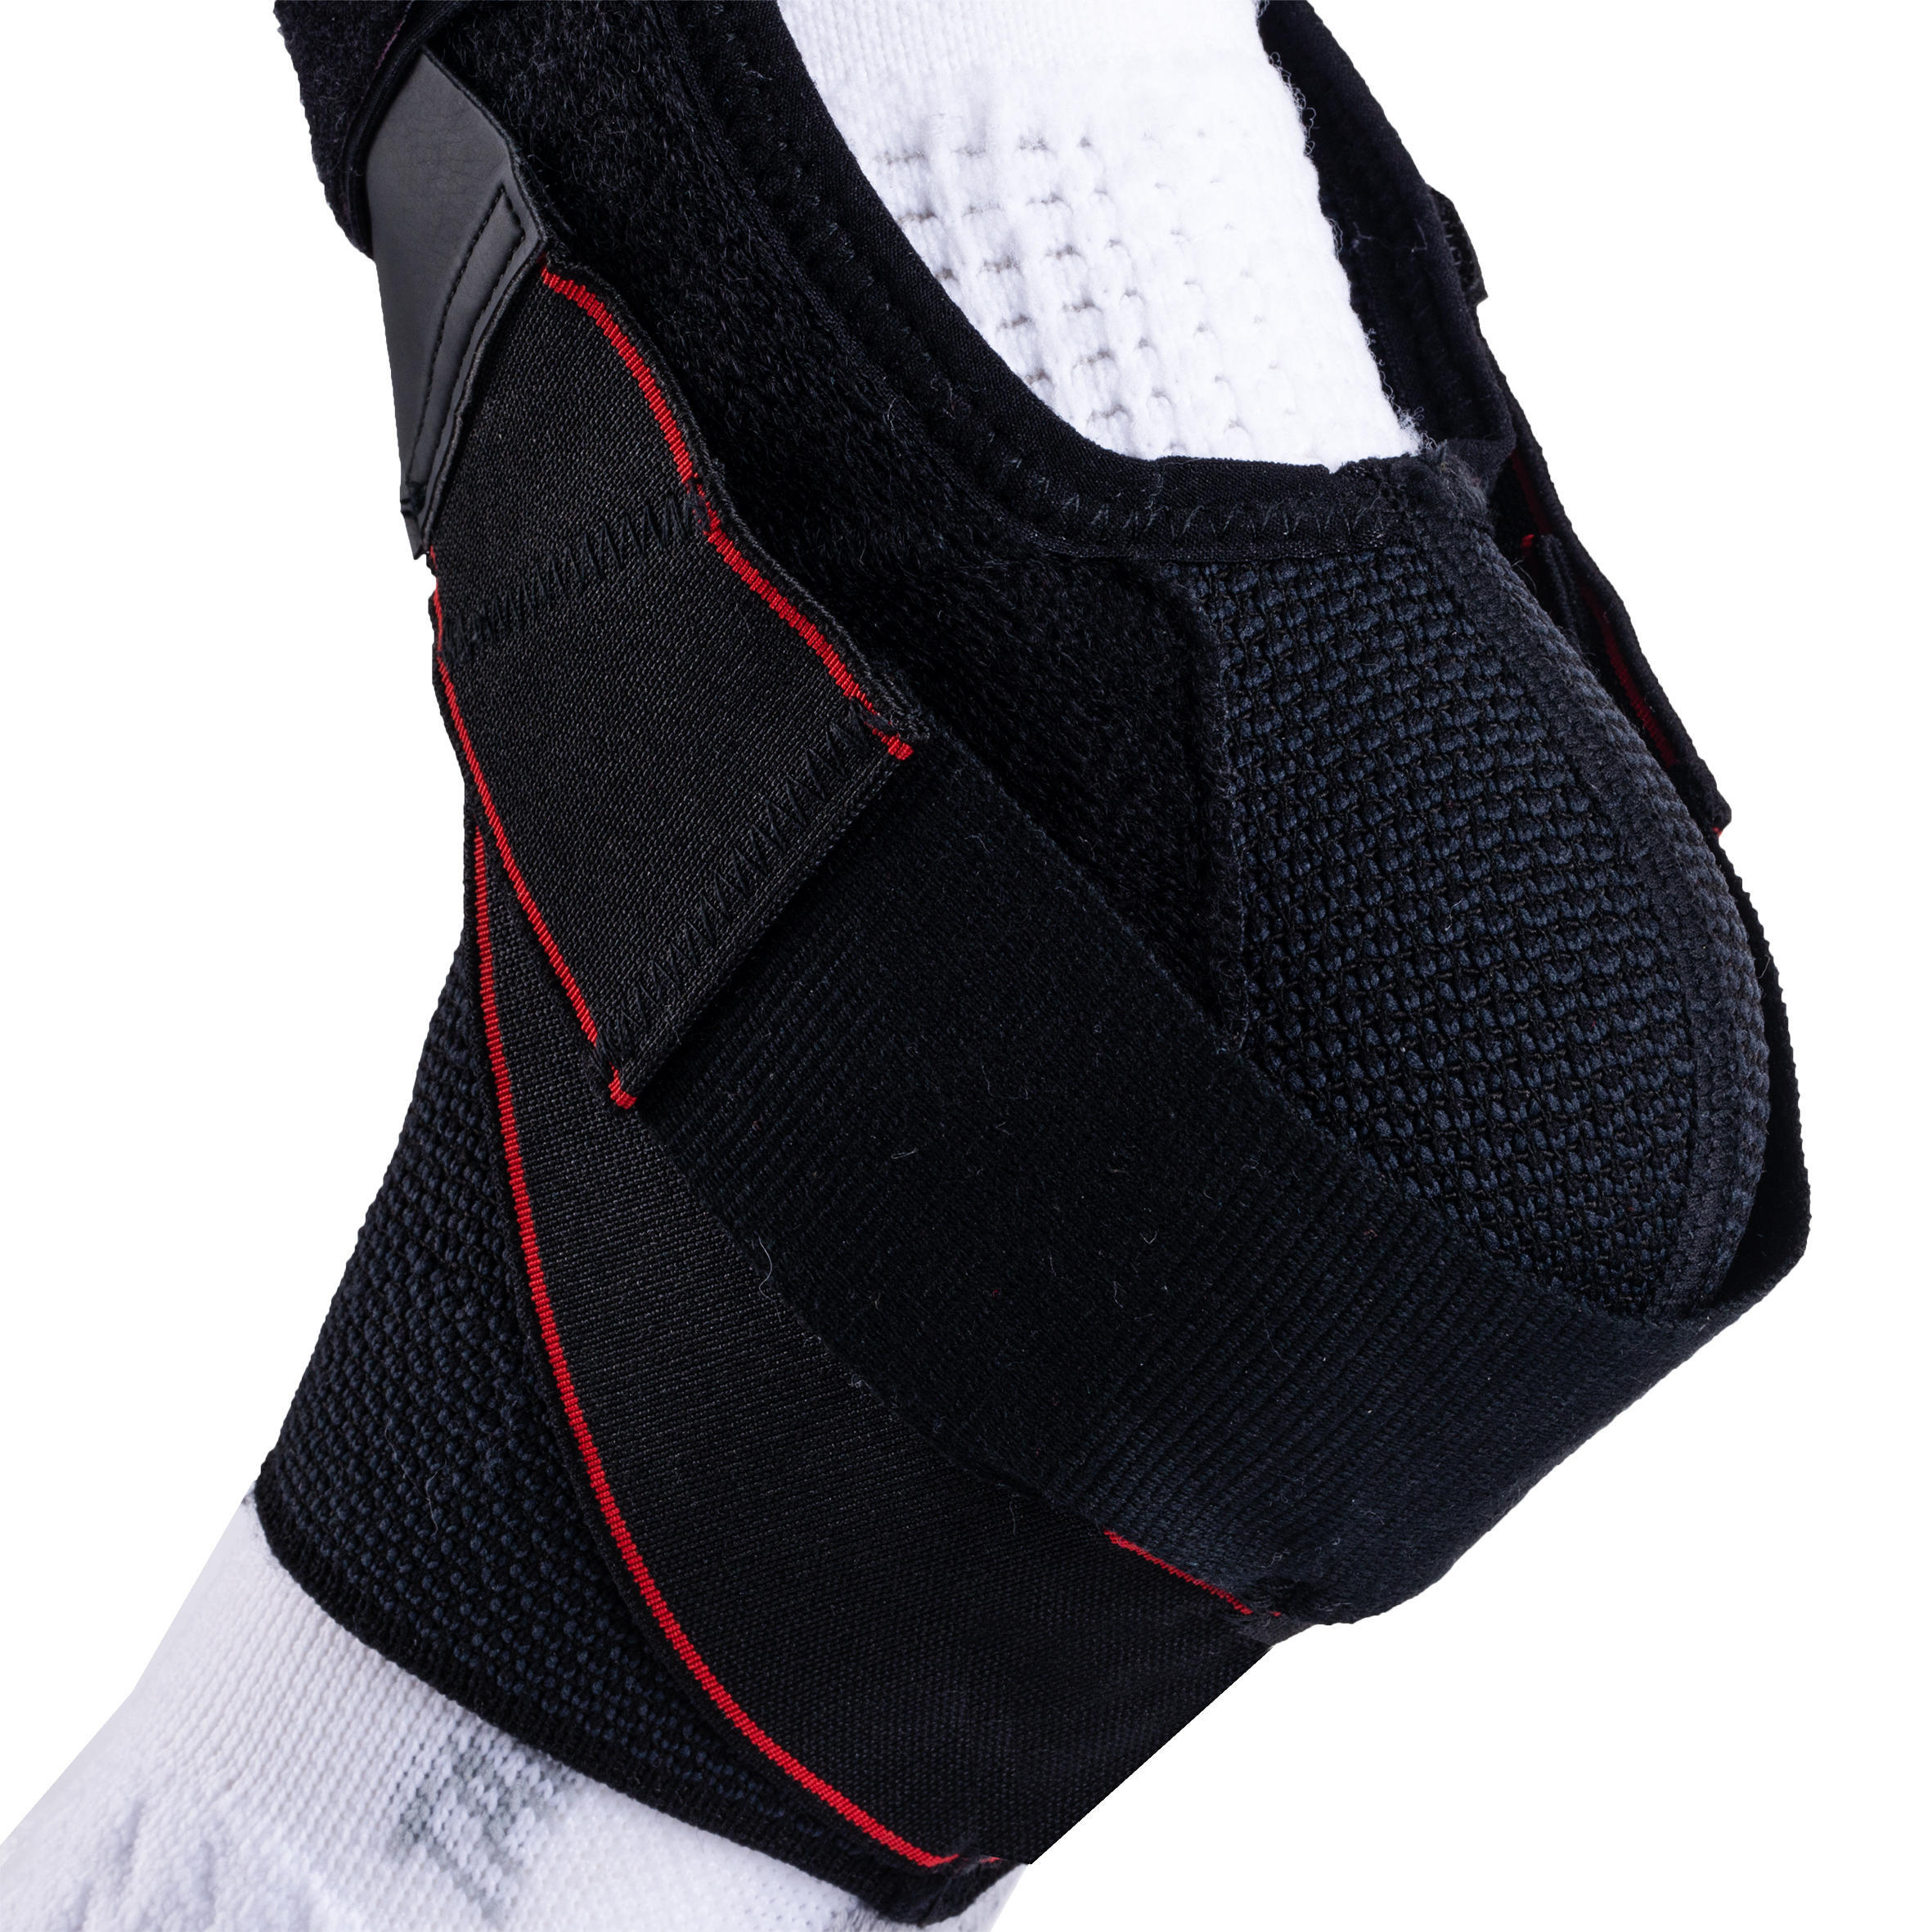 Refurbished Strong 500 Mens/Womens Right/Left Ankle Ligament Support - B Grade 4/7